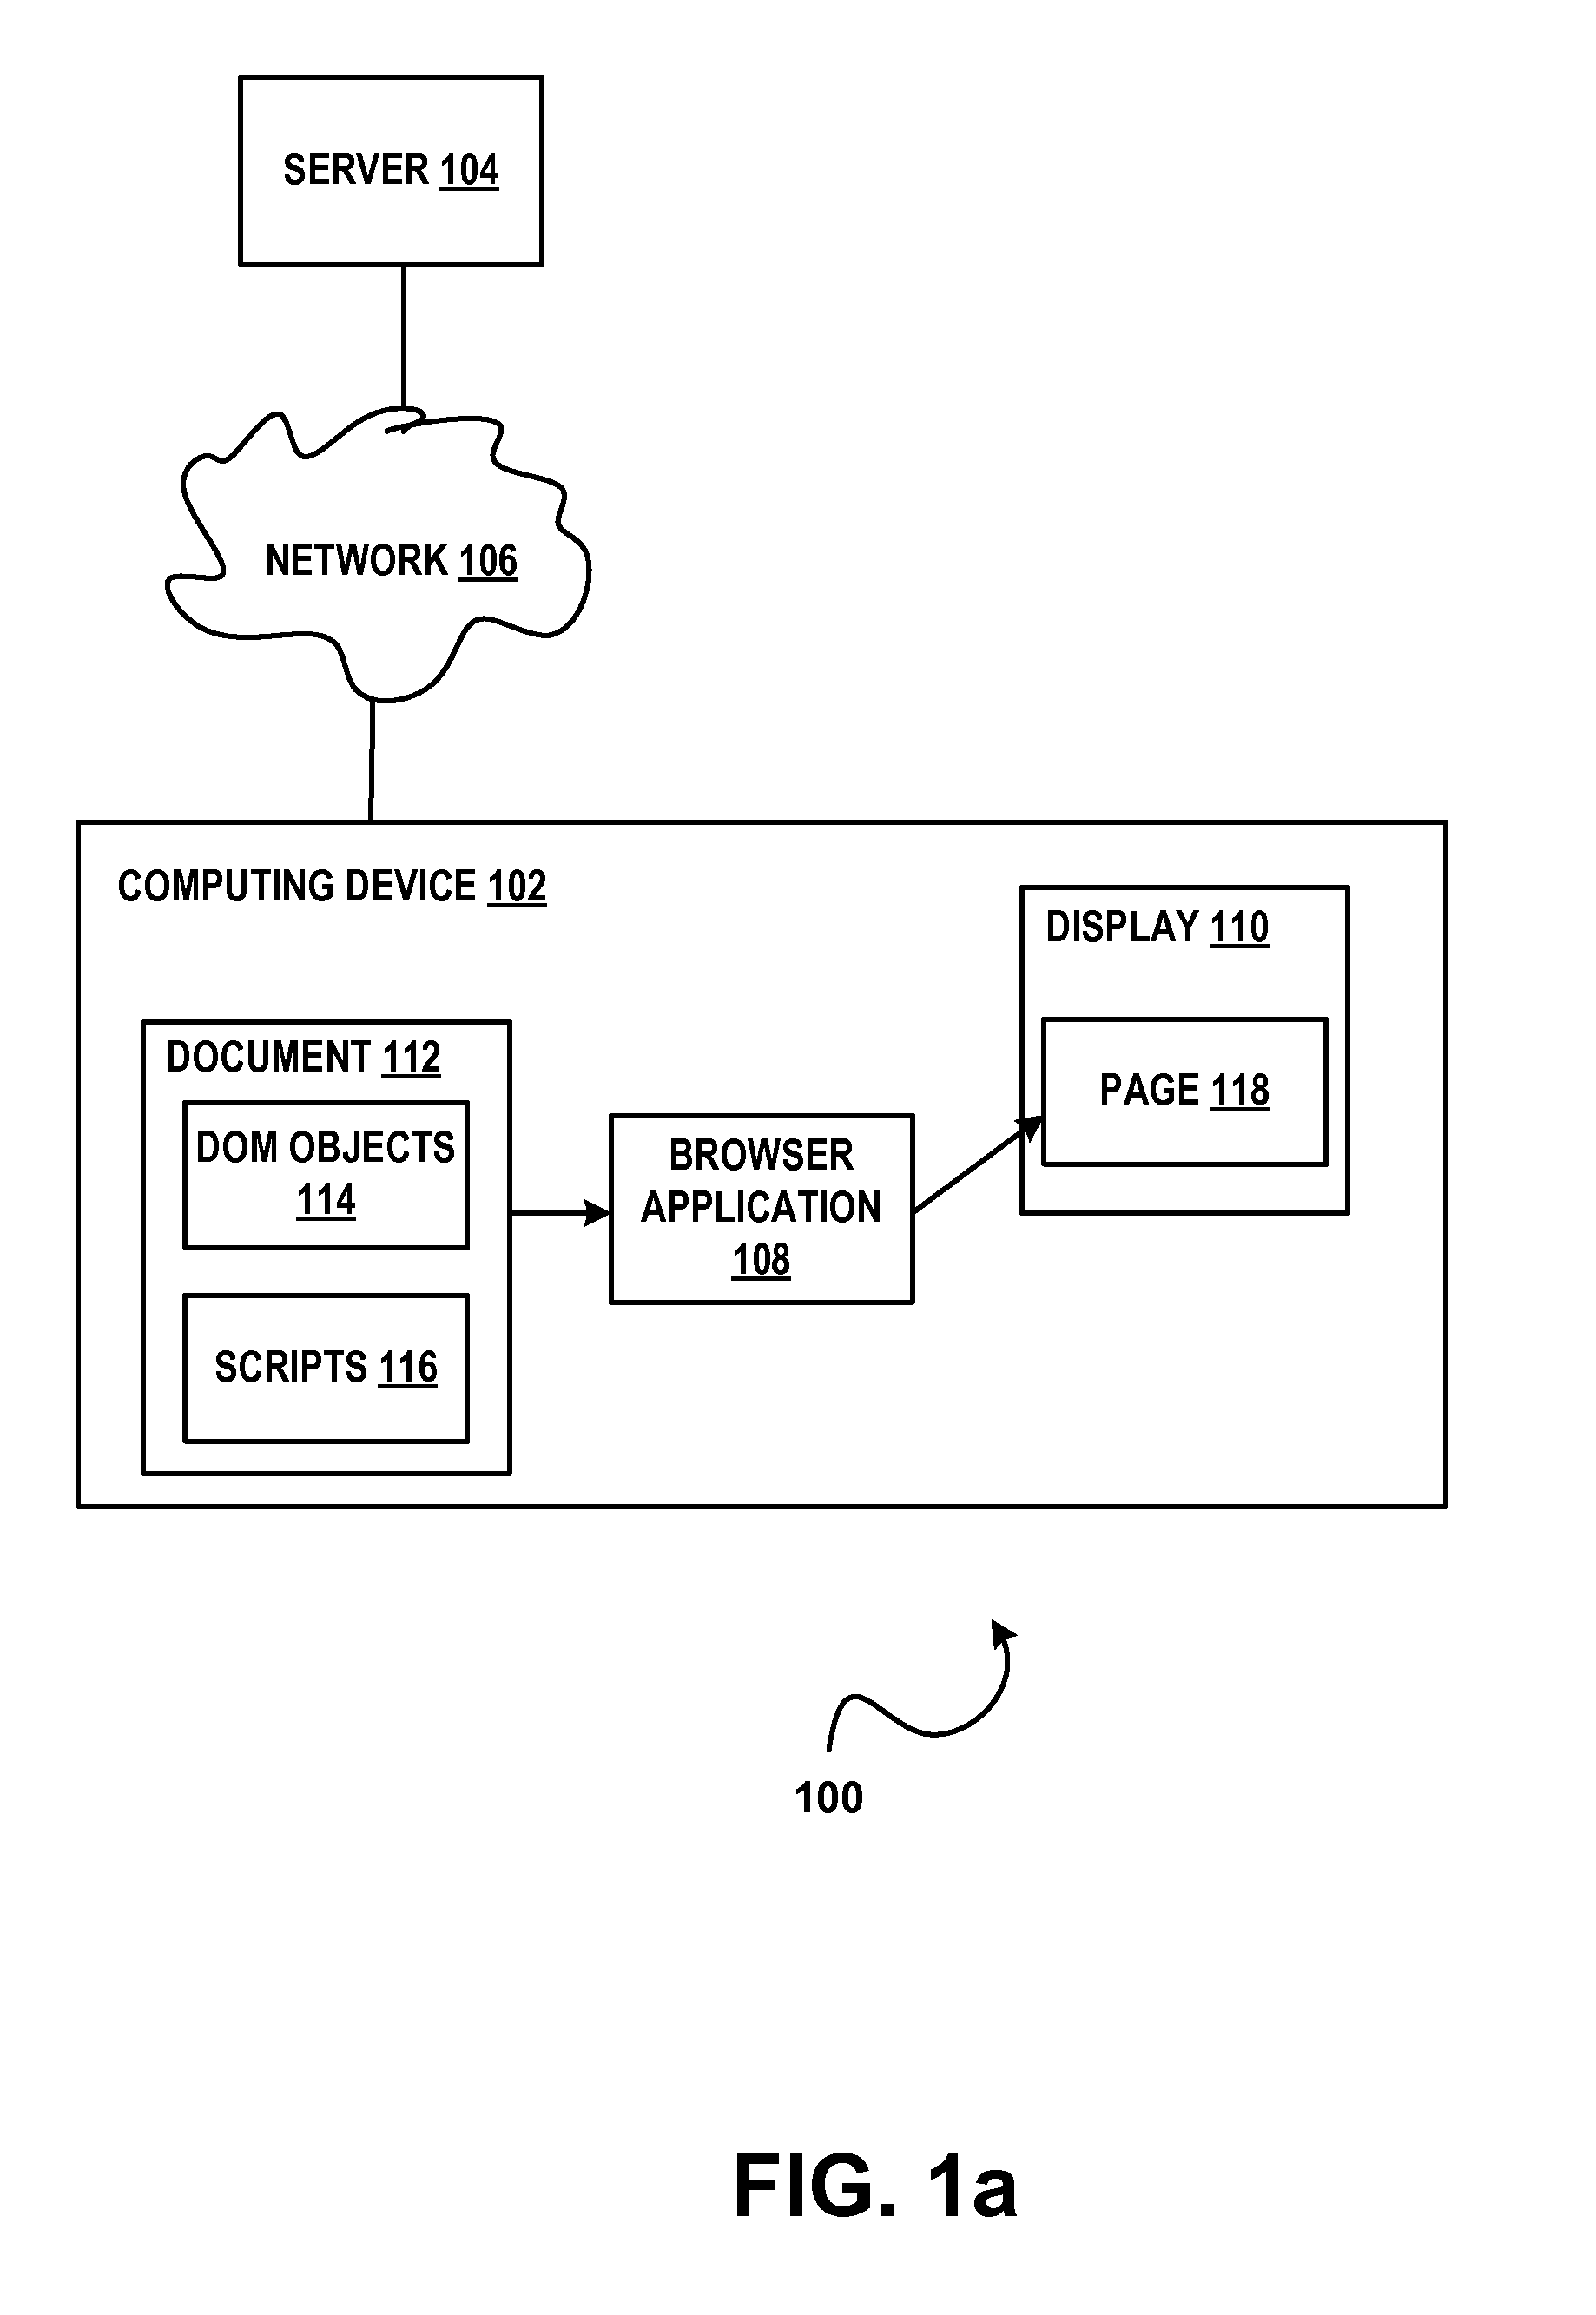 Memory usage data collection and analysis for dynamic objects